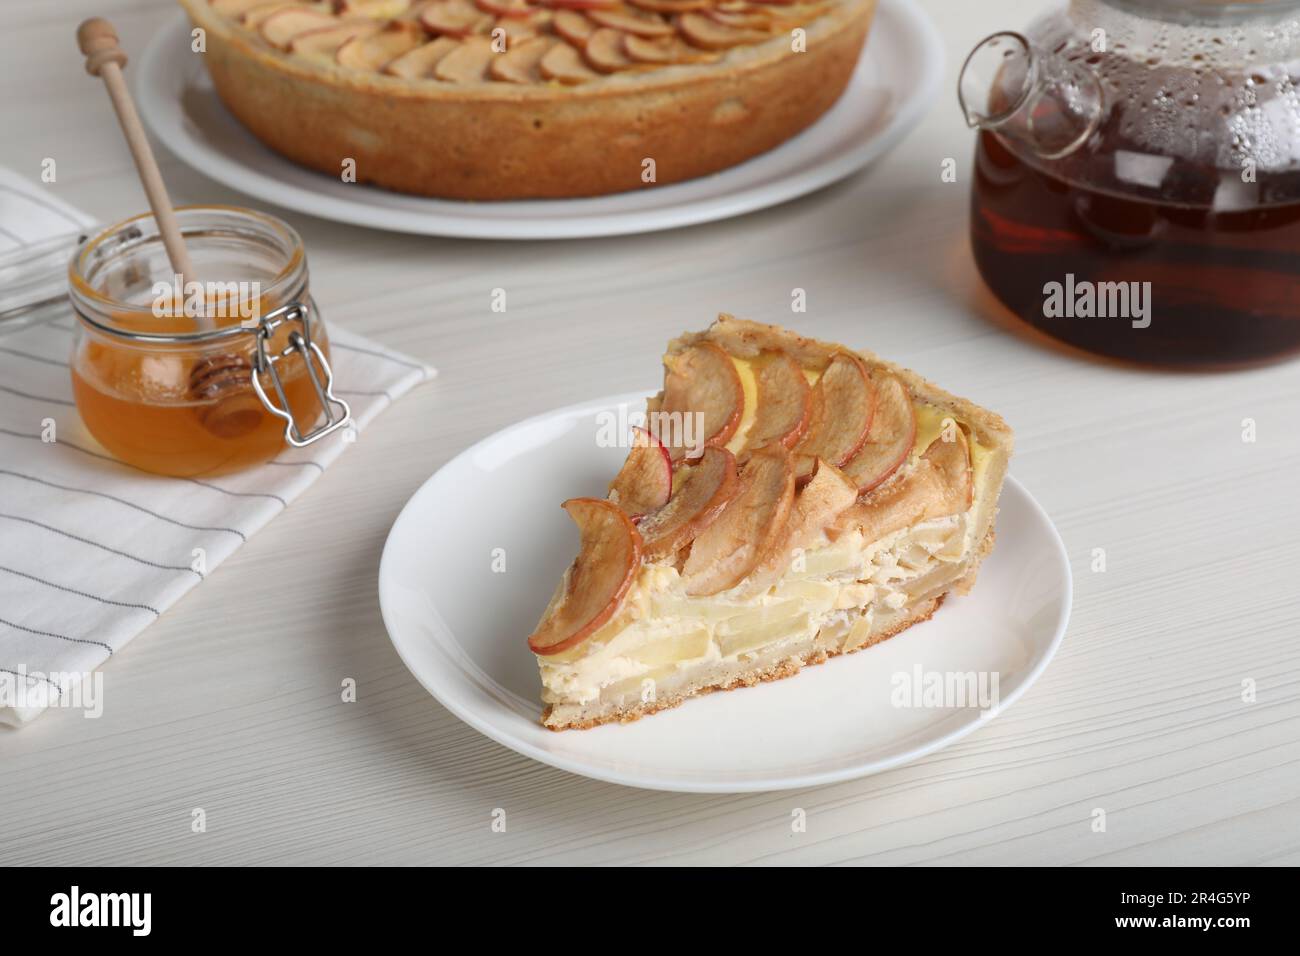 Piece of delicious homemade apple pie served on white wooden table Stock Photo